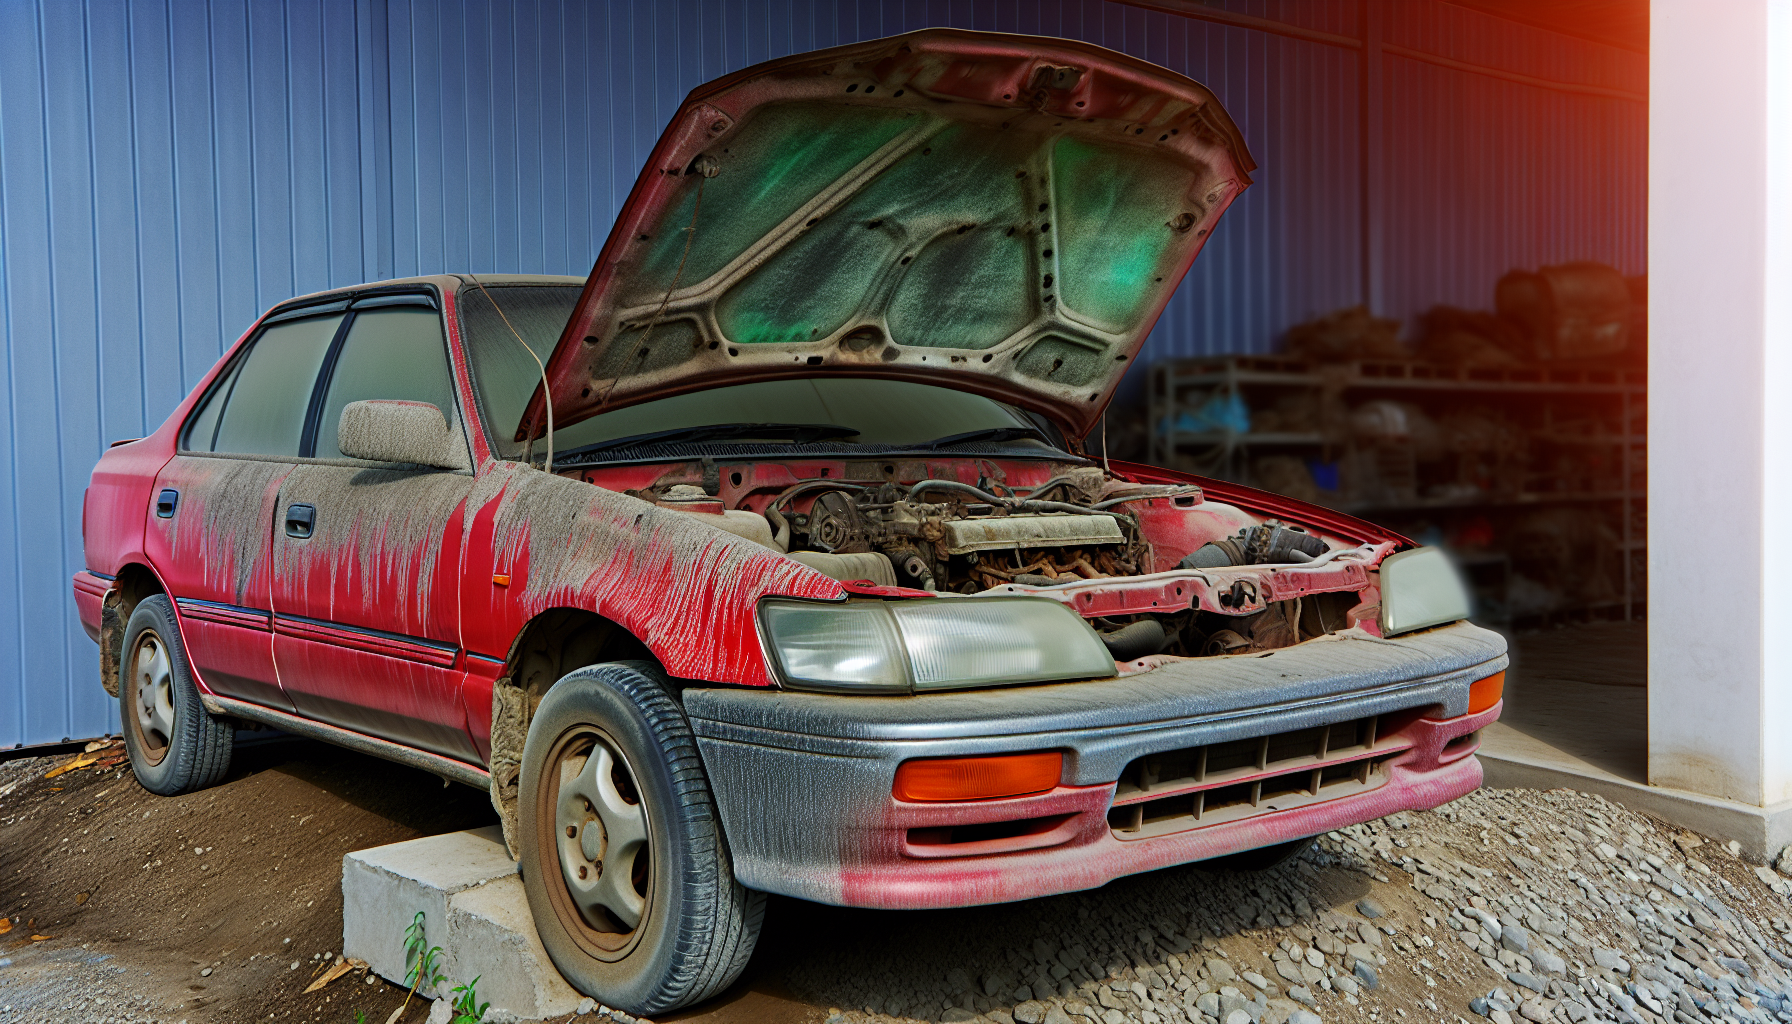 A vehicle with neglected maintenance and worn-out parts